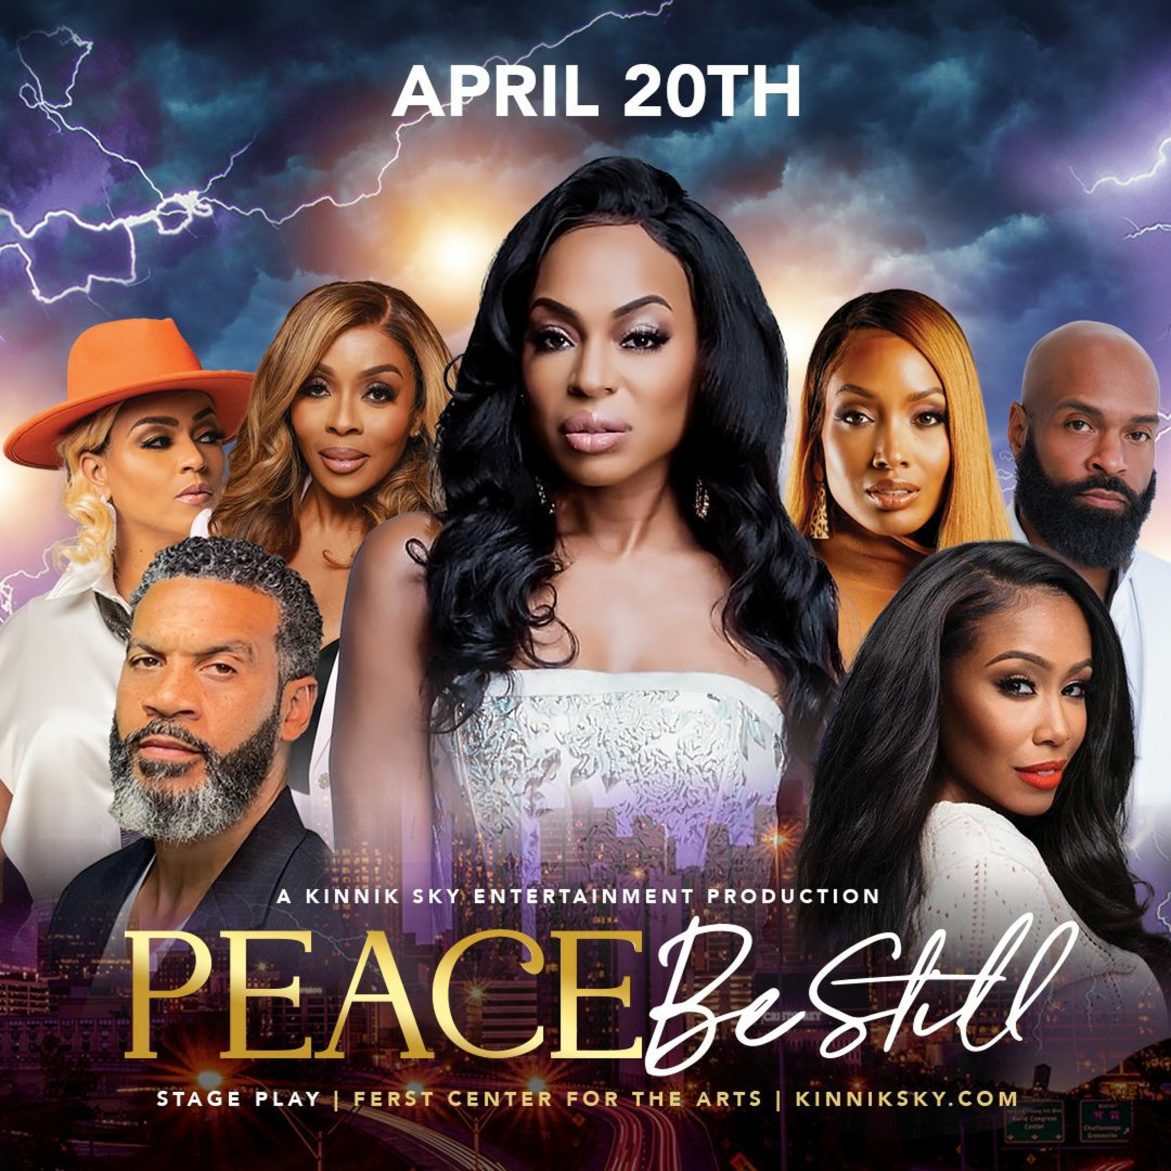 Black Podcasting - 'Peace Be Still' stage play is GIVING ALL THE DRAMA!